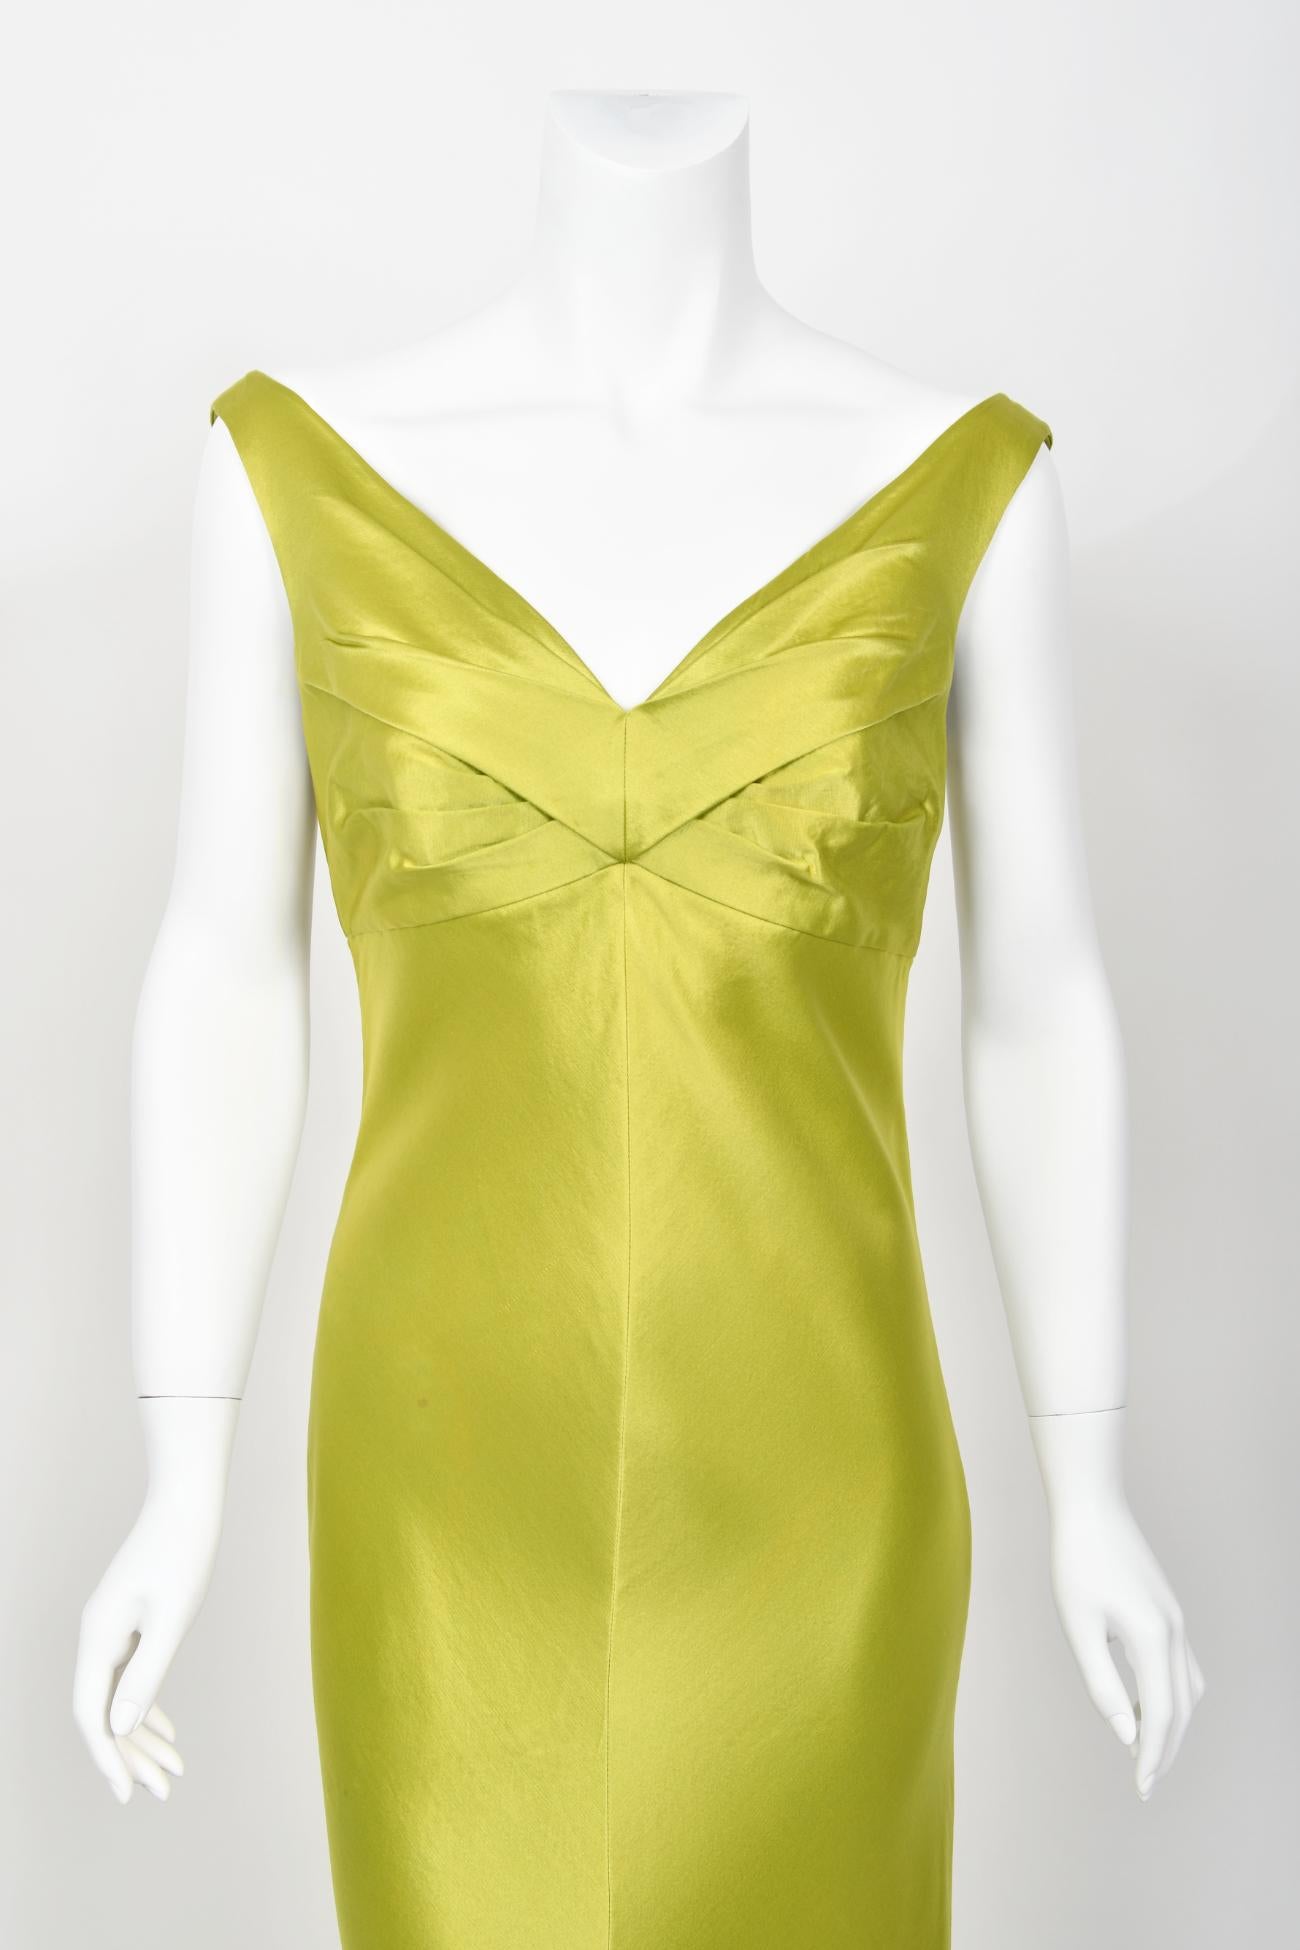 1995 Gianni Versace Couture Documented Runway Chartreuse Silk Off-Shoulder Gown For Sale 4